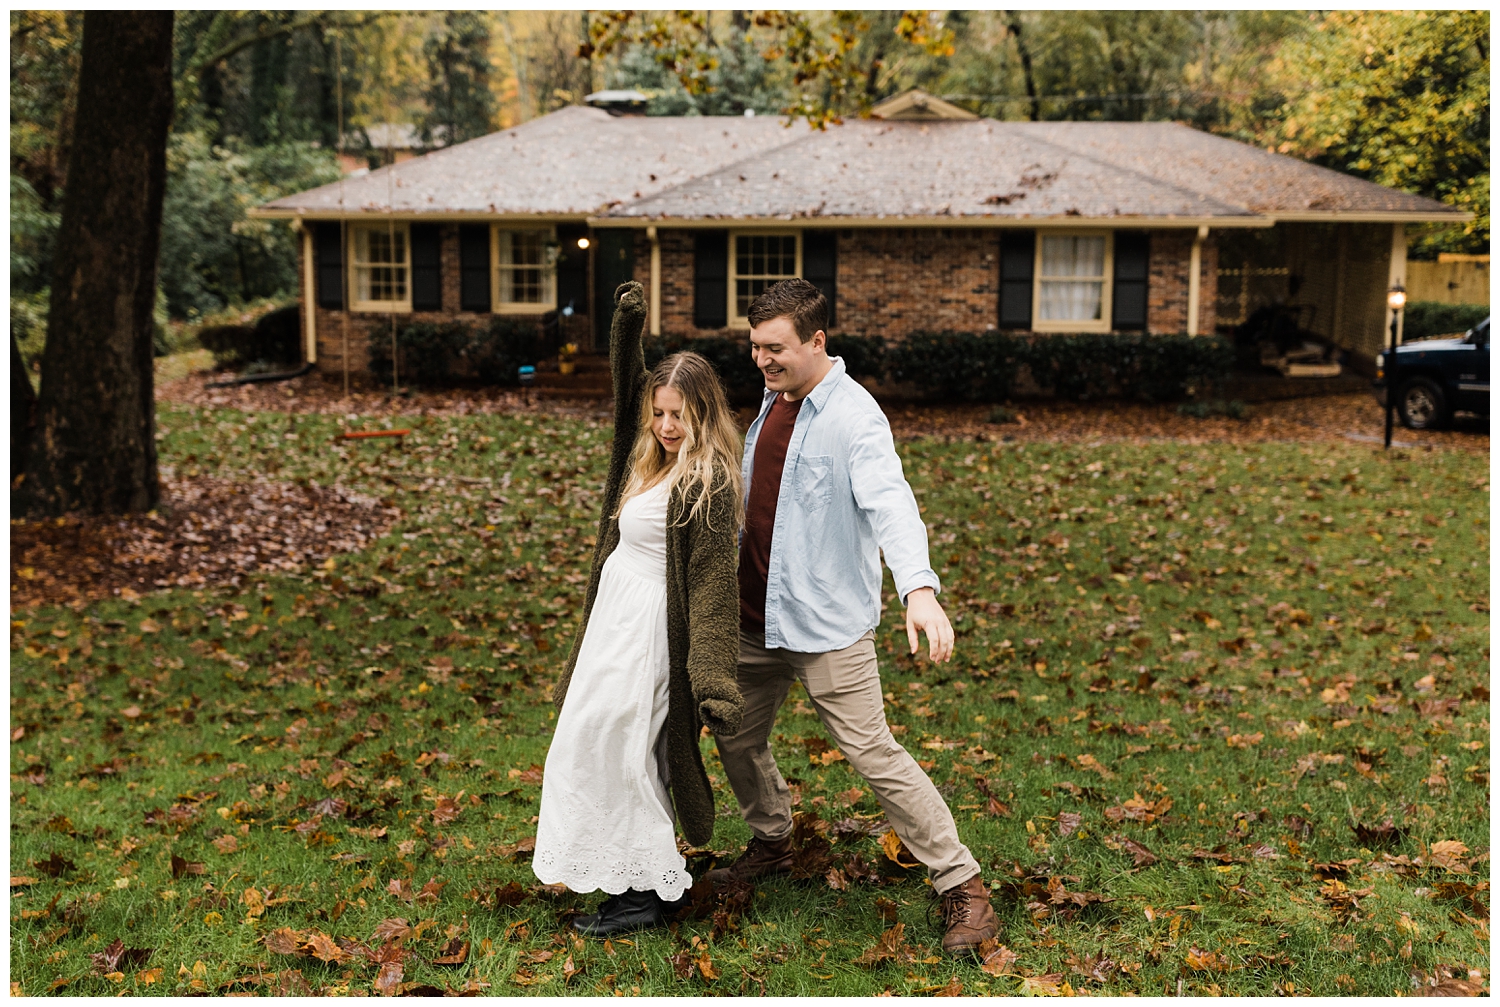 Rainy Day Engagement Session in Marietta, Georgia with cute couple dancing in their front yard